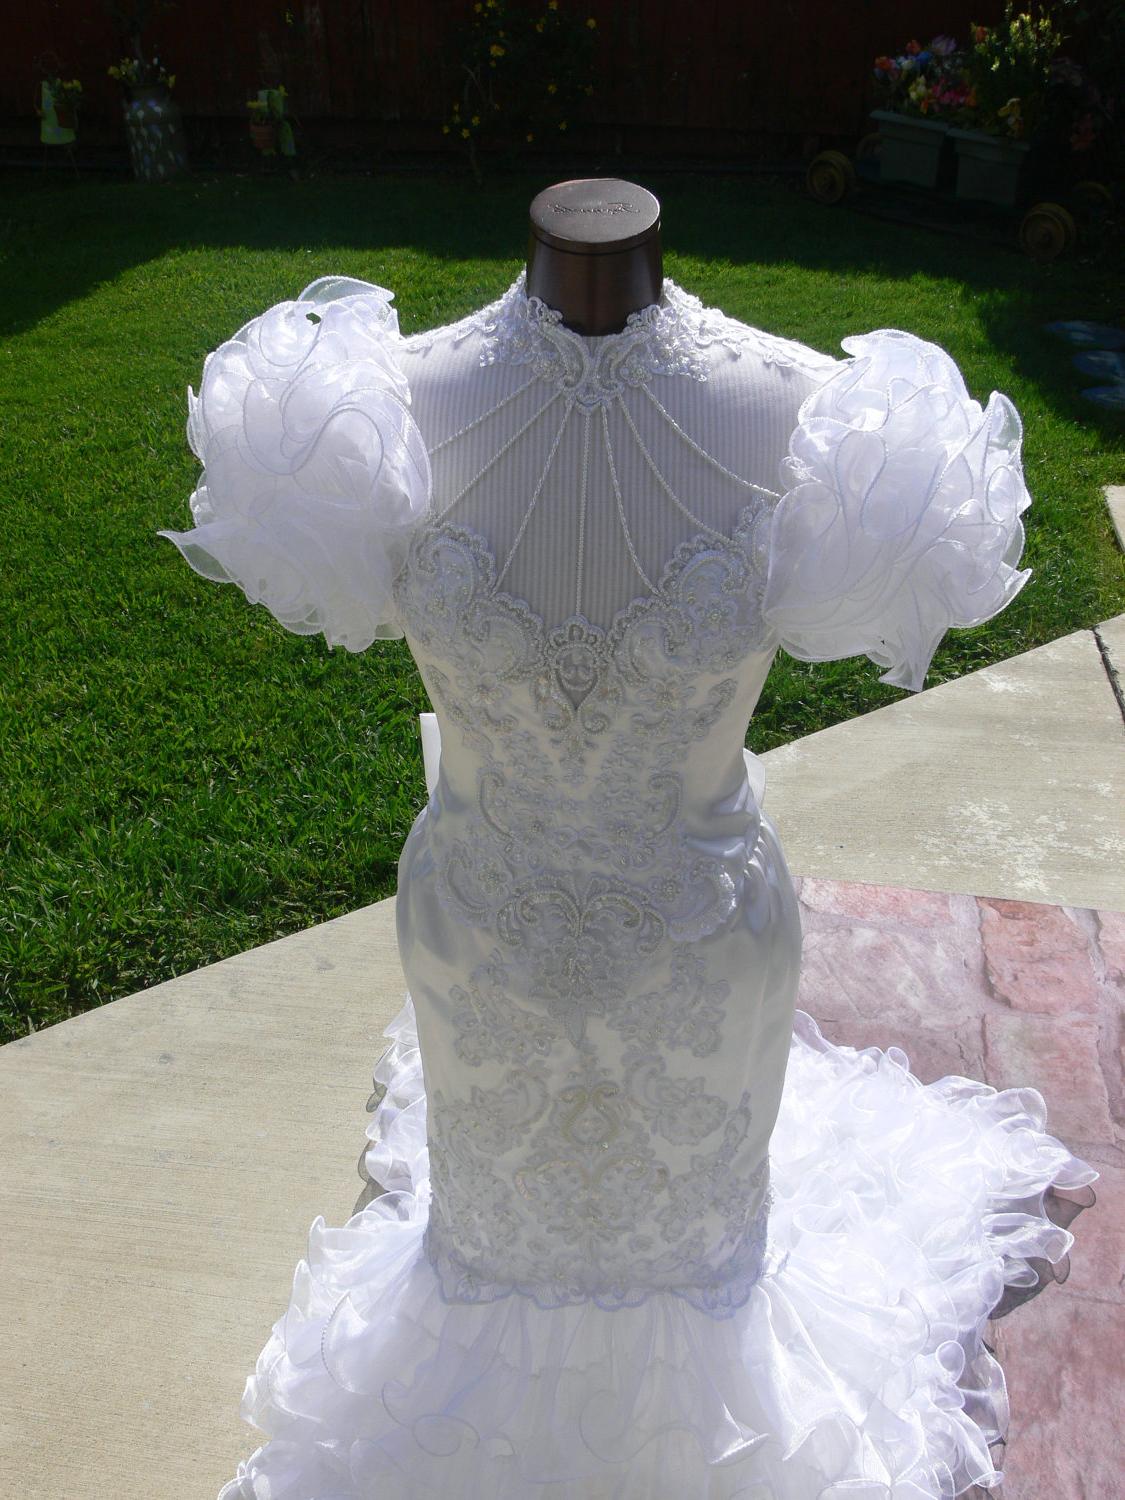 White Satin Bridal Mermaid Wedding Gown size 3 or 4 with pearls and long